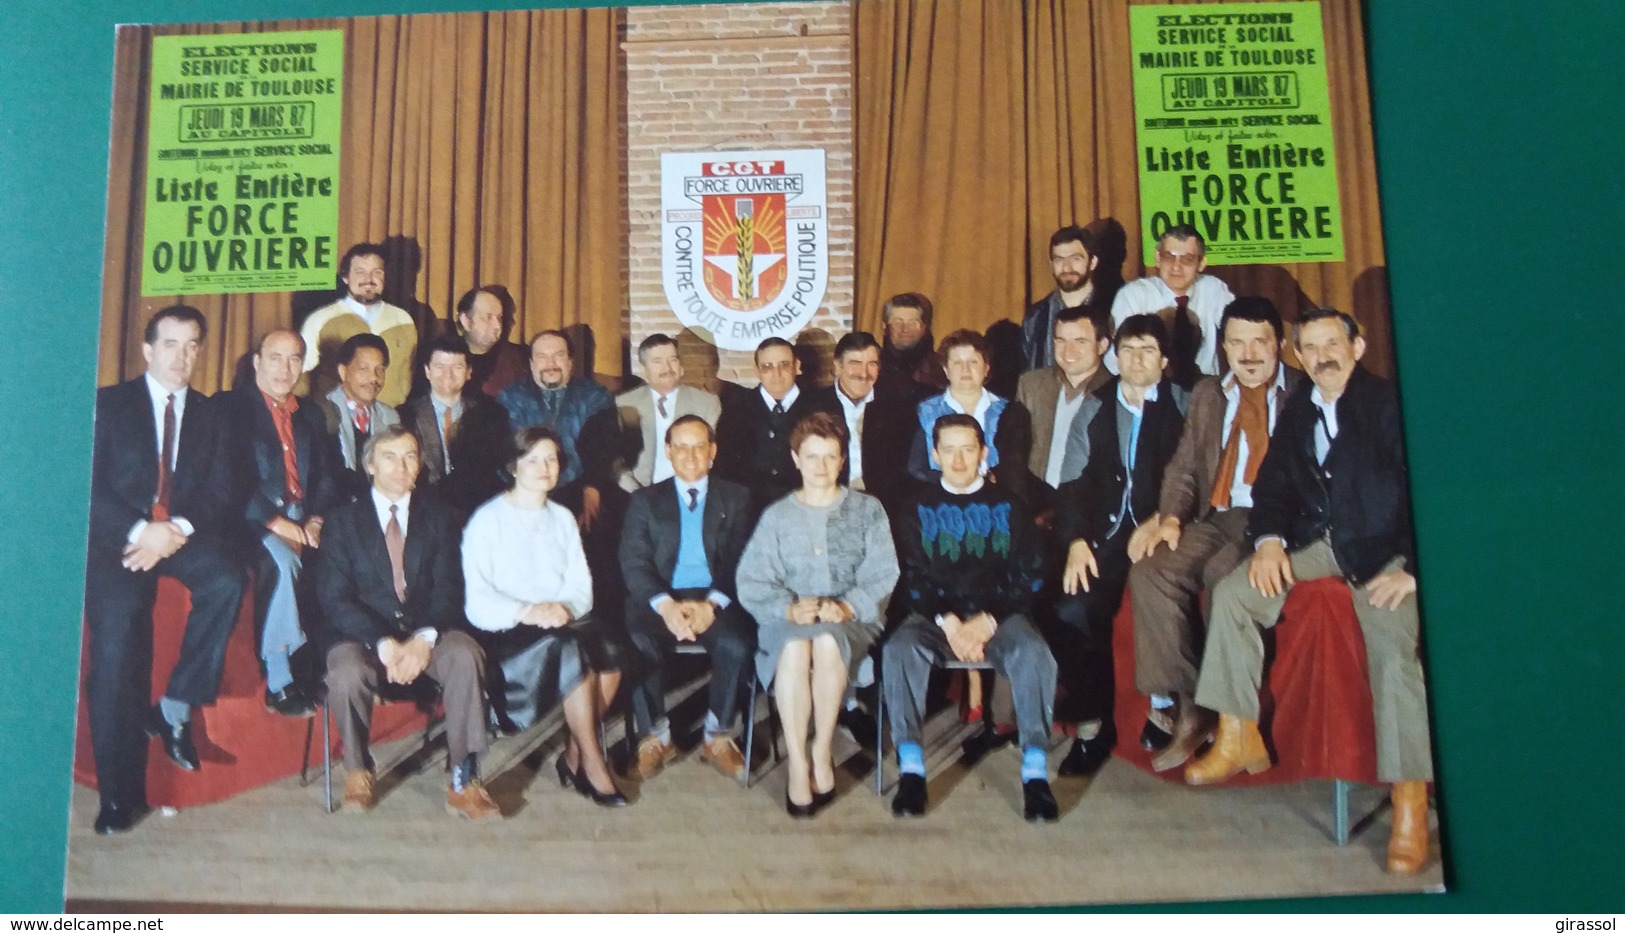 CPSM SYNDICAT FORCE OUVRIERE ELACTION MARS 1987 MAIRIE DE TOULOUSE ED LARREY EQUIPE CANDIDATS ? - Sindacati